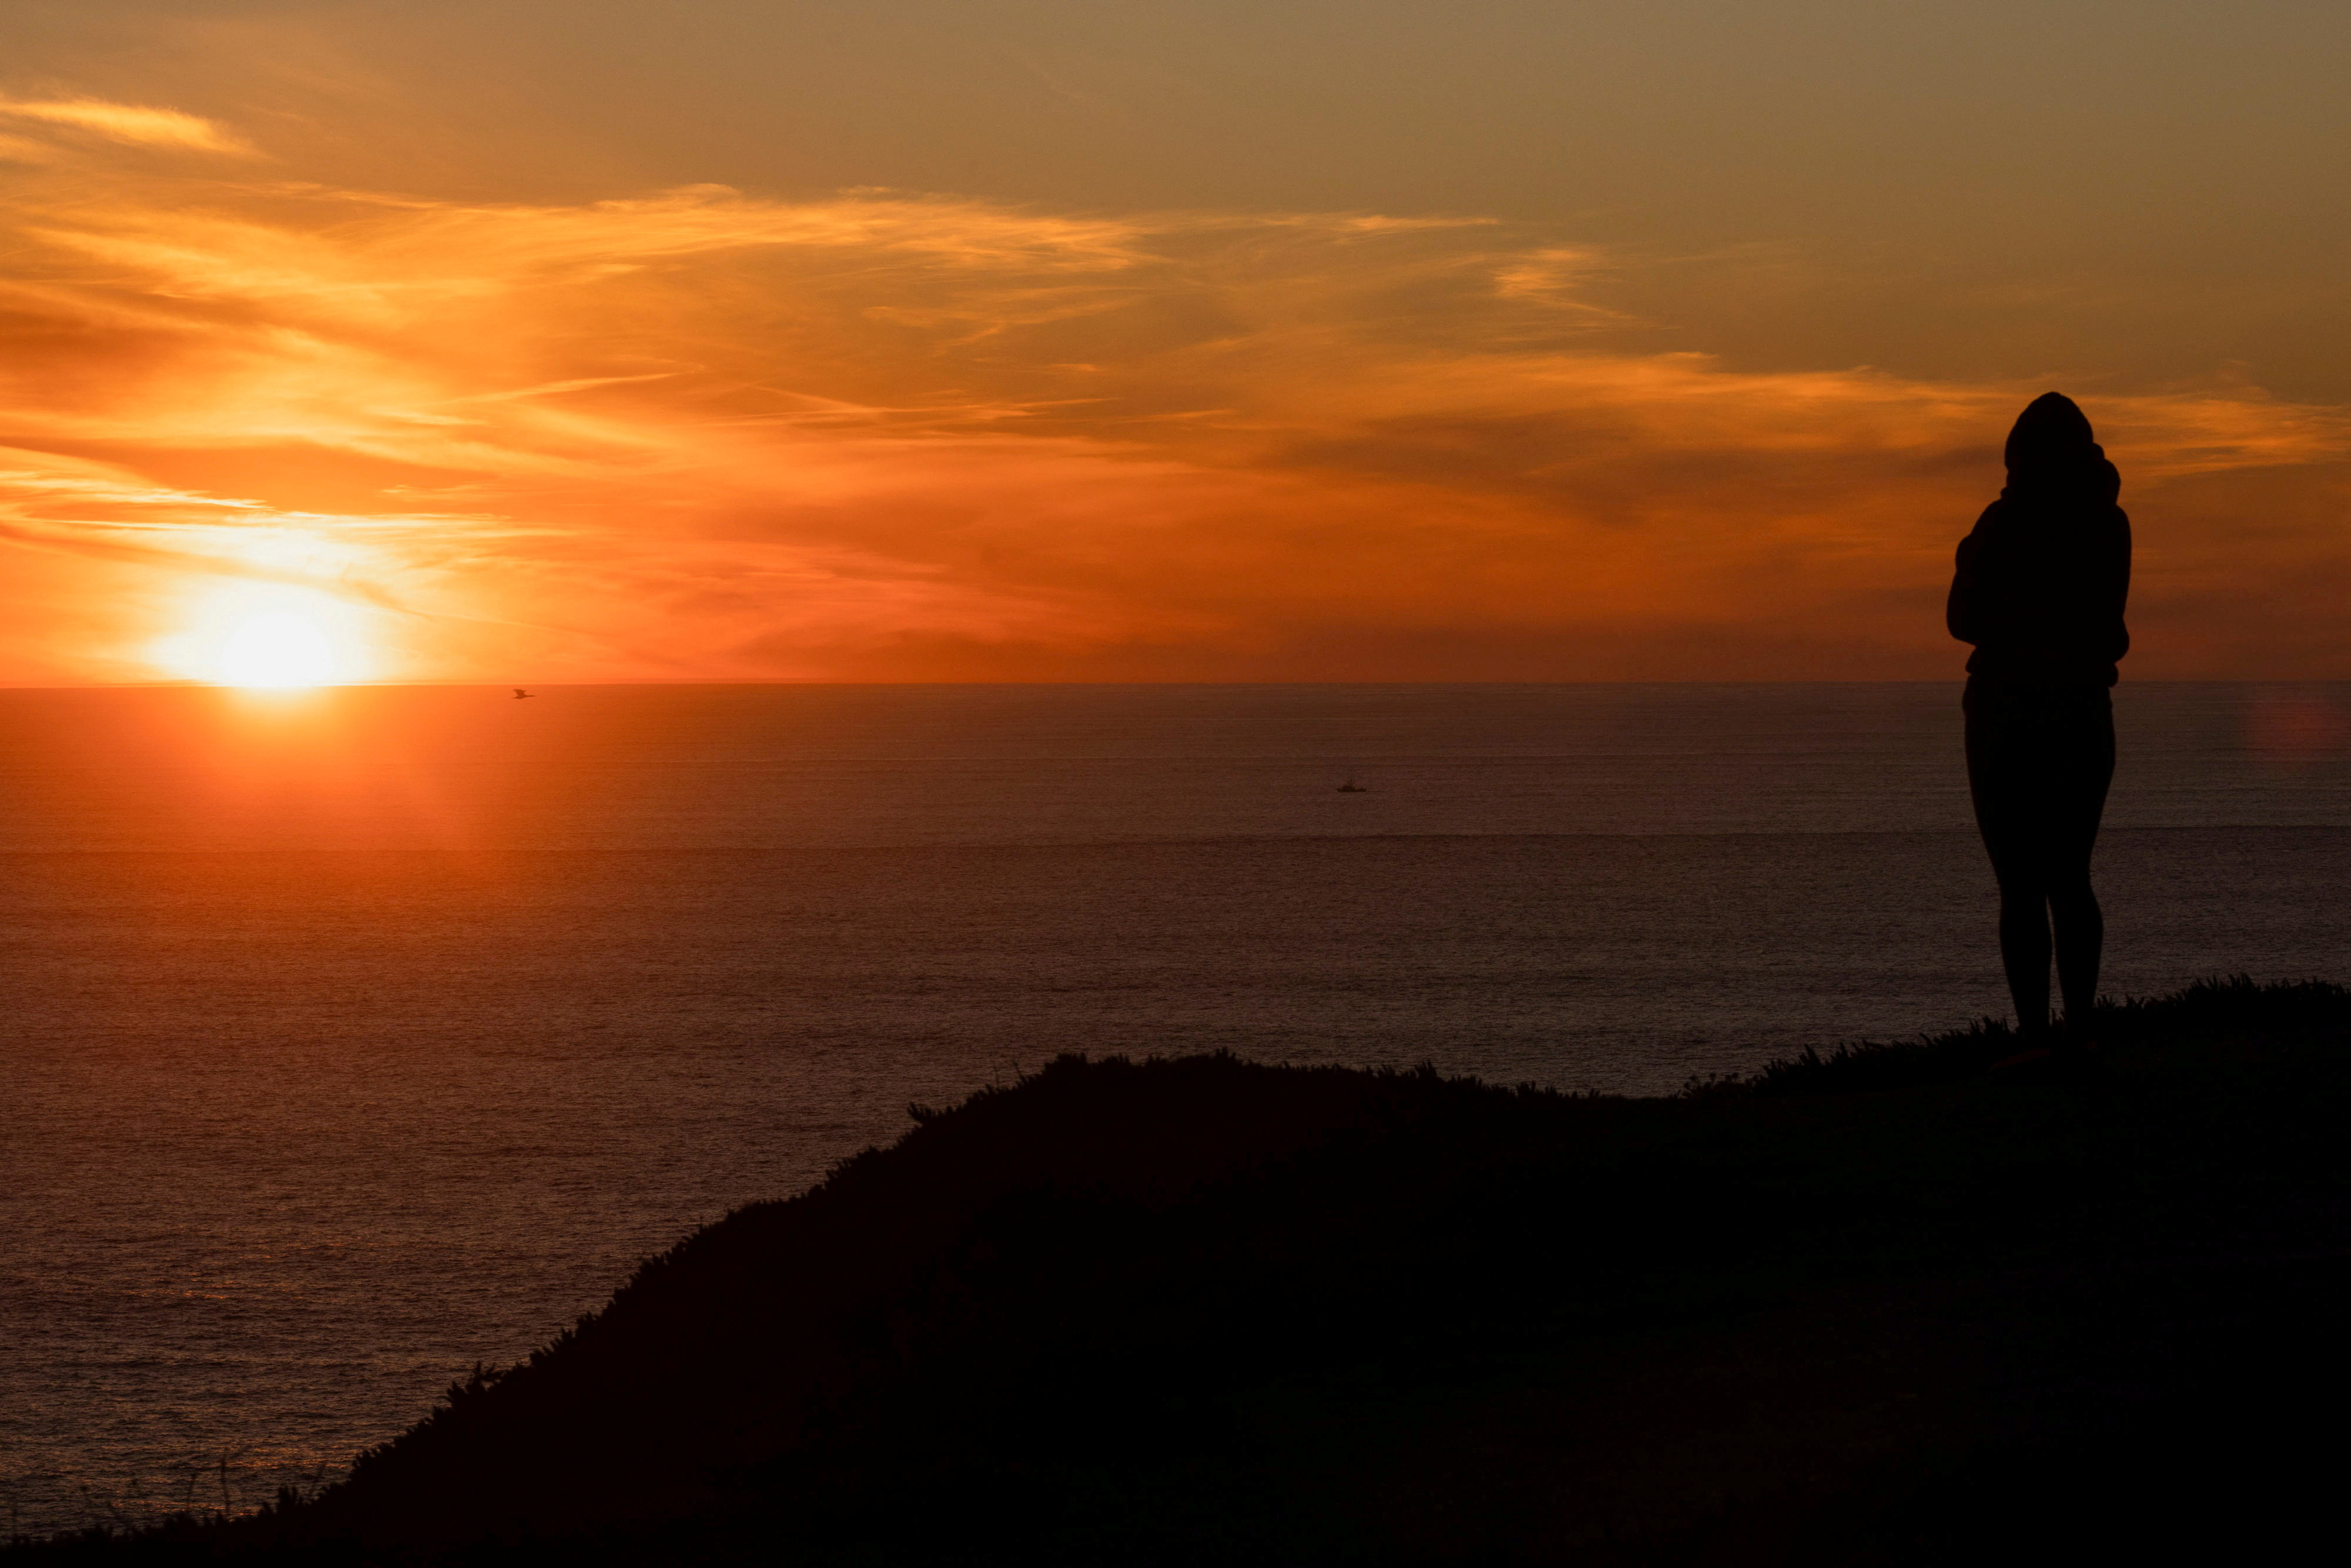 A woman watches the sunset over the Pacific Ocean along Highway 1 near Half Moon Bay